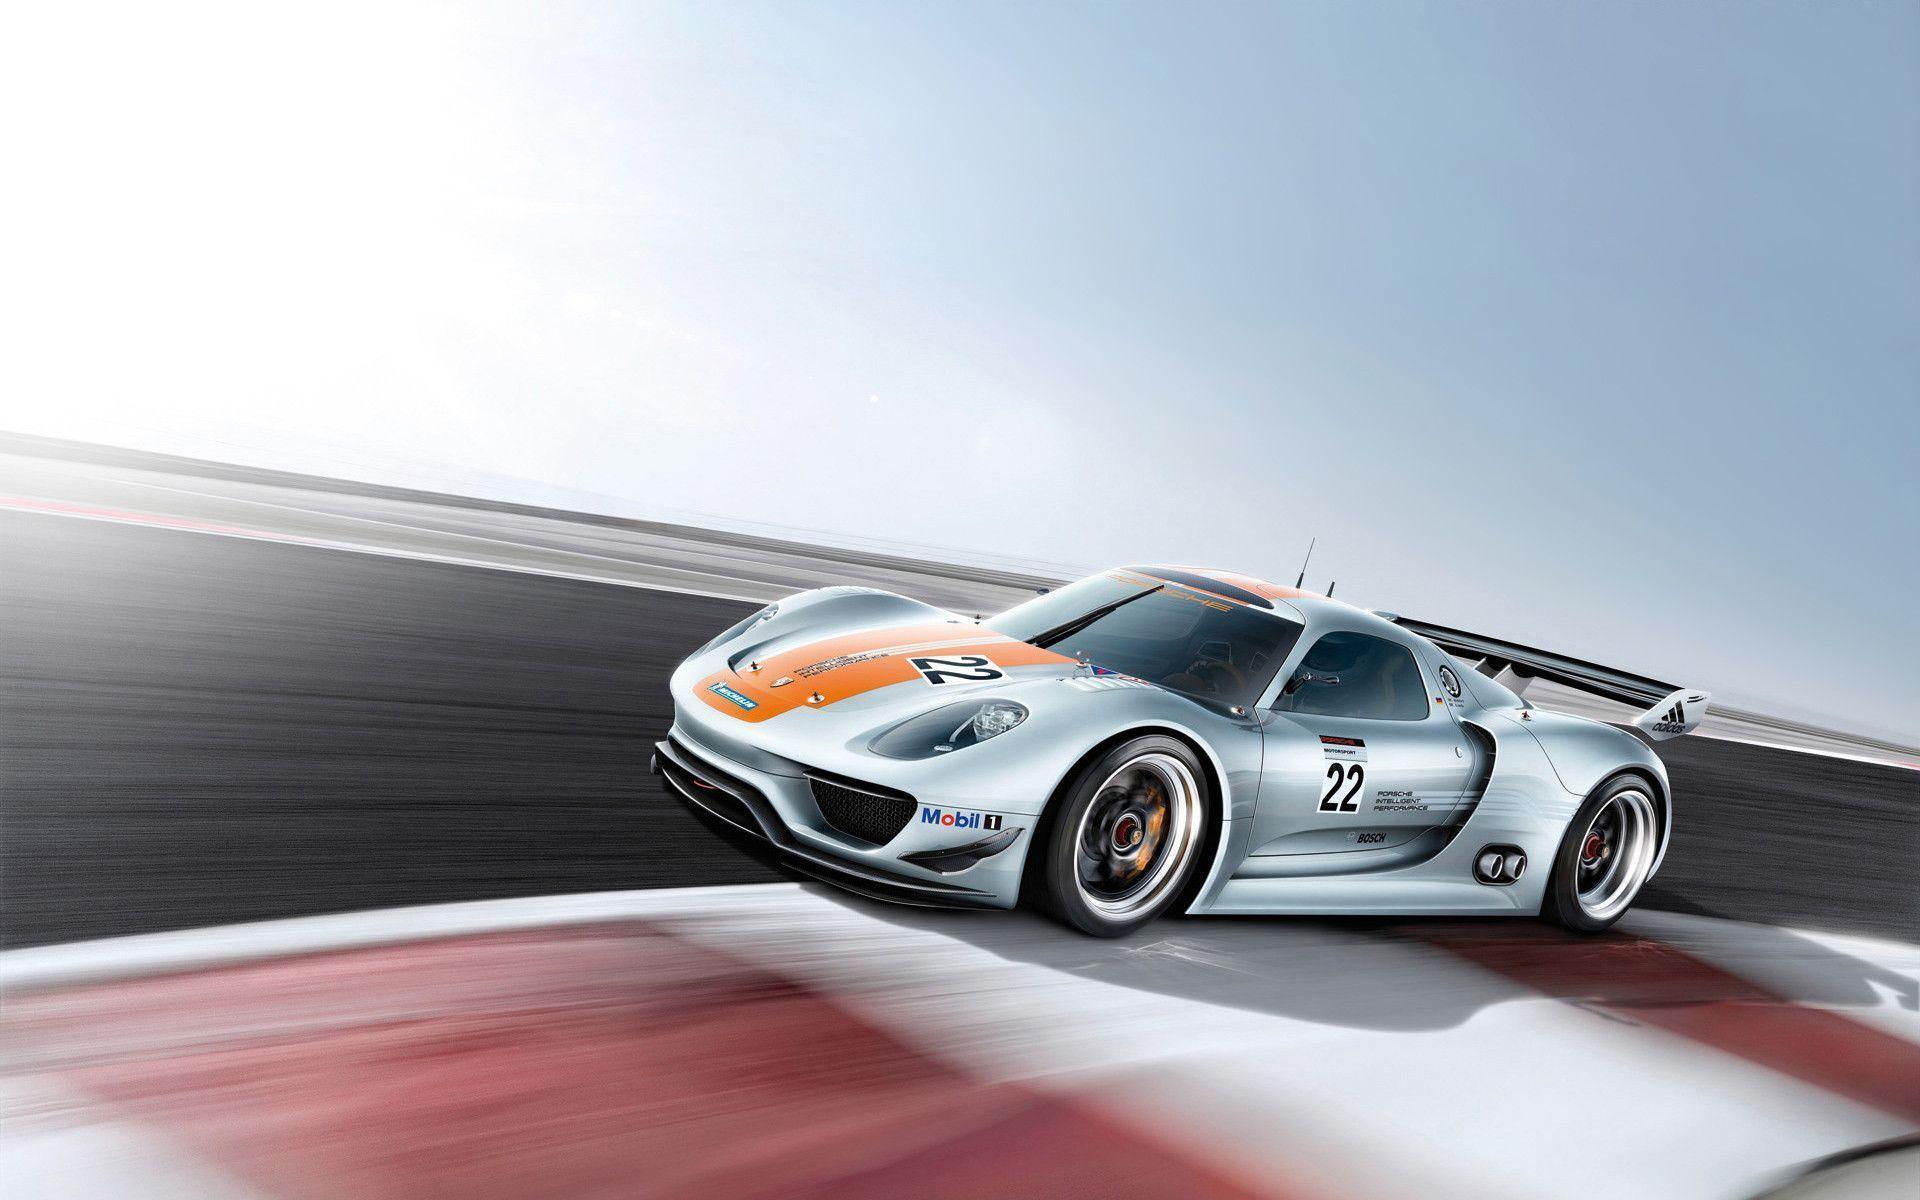 Daily Wallpaper: Porsche 918 RSR. I Like To Waste My Time